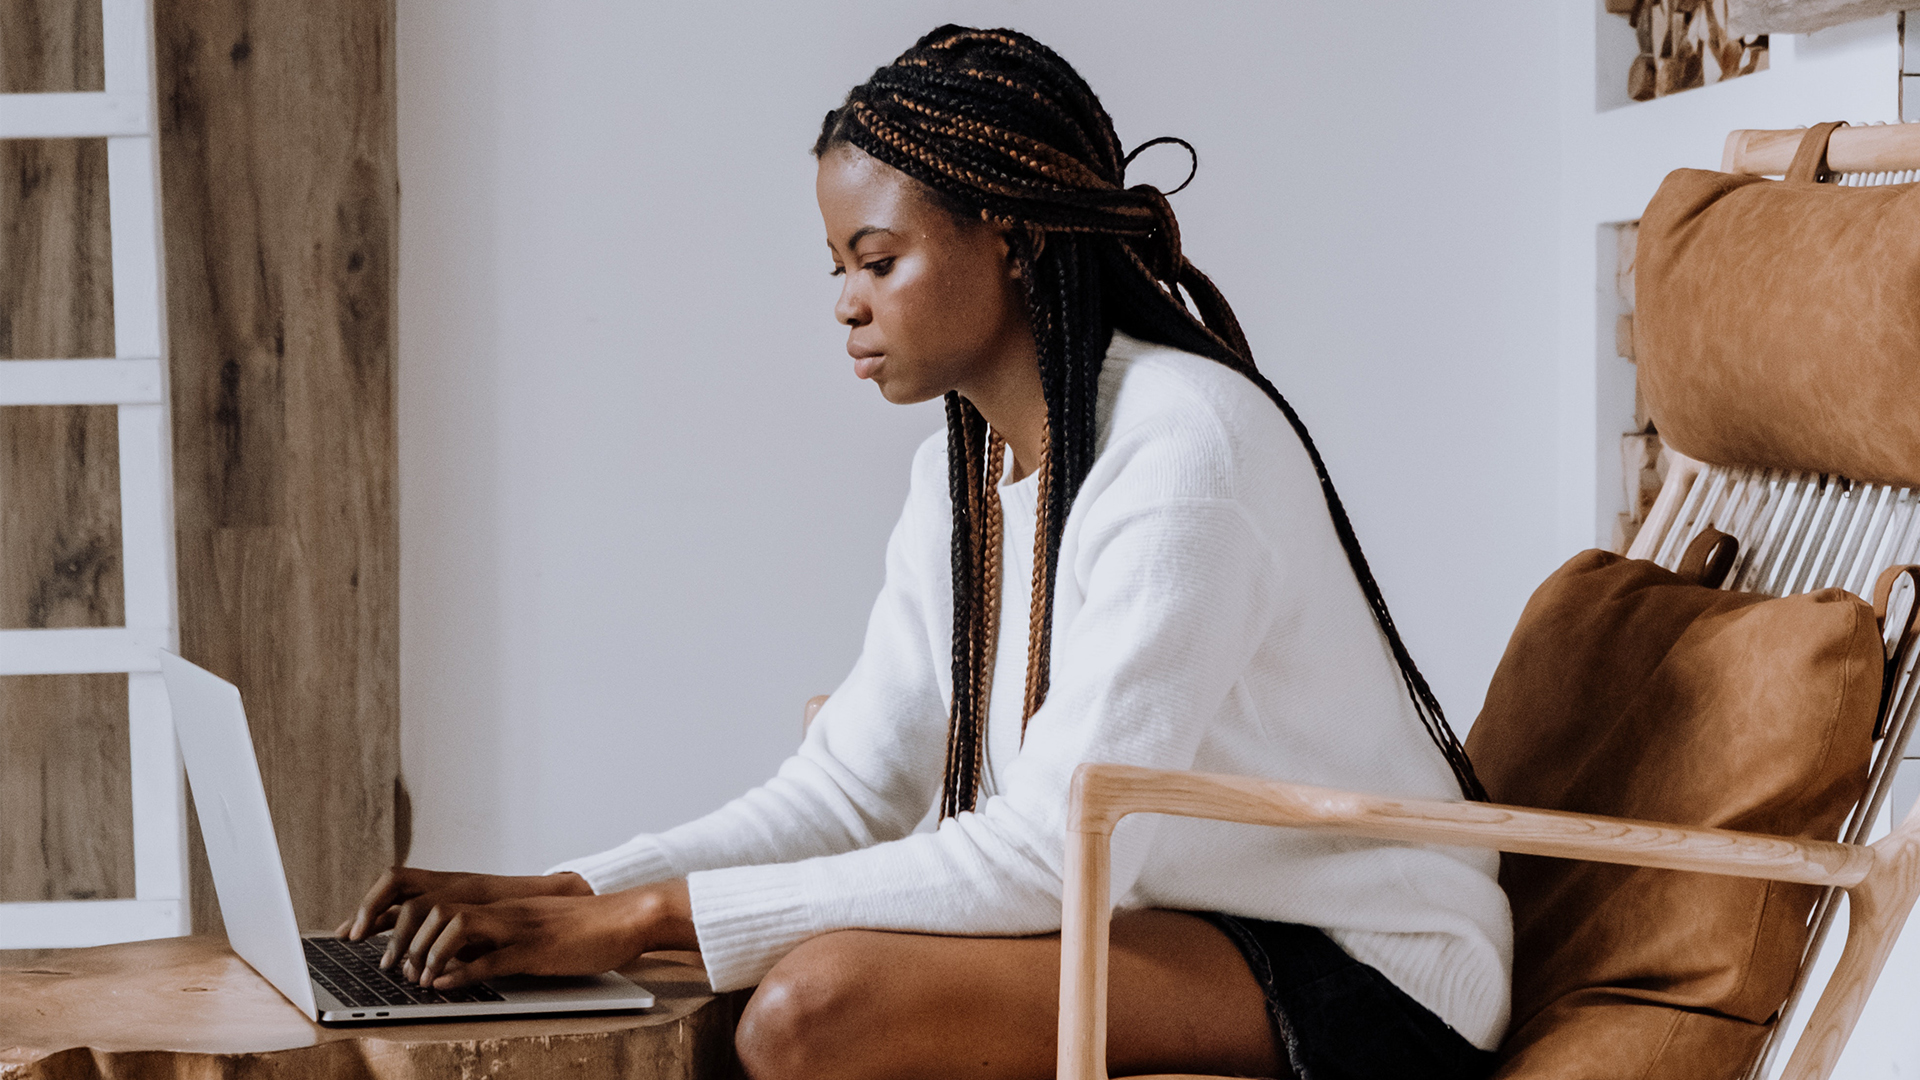 Some Black Women Prefer To Work From Home To Escape Racism And We Don't Blame Them